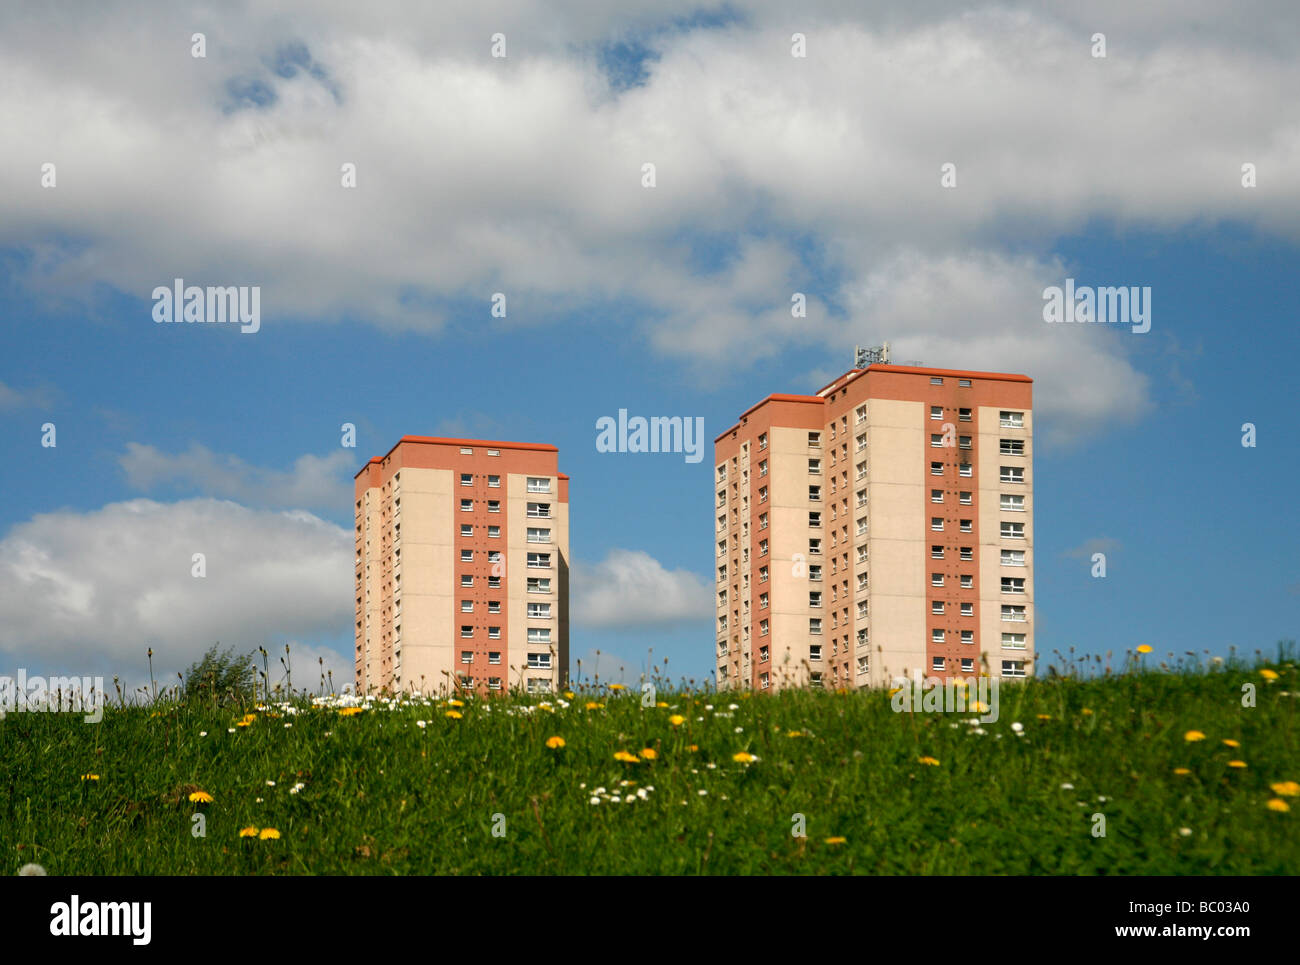 High rise flats in housing estate in Leeds, Yorkshire UK Stock Photo